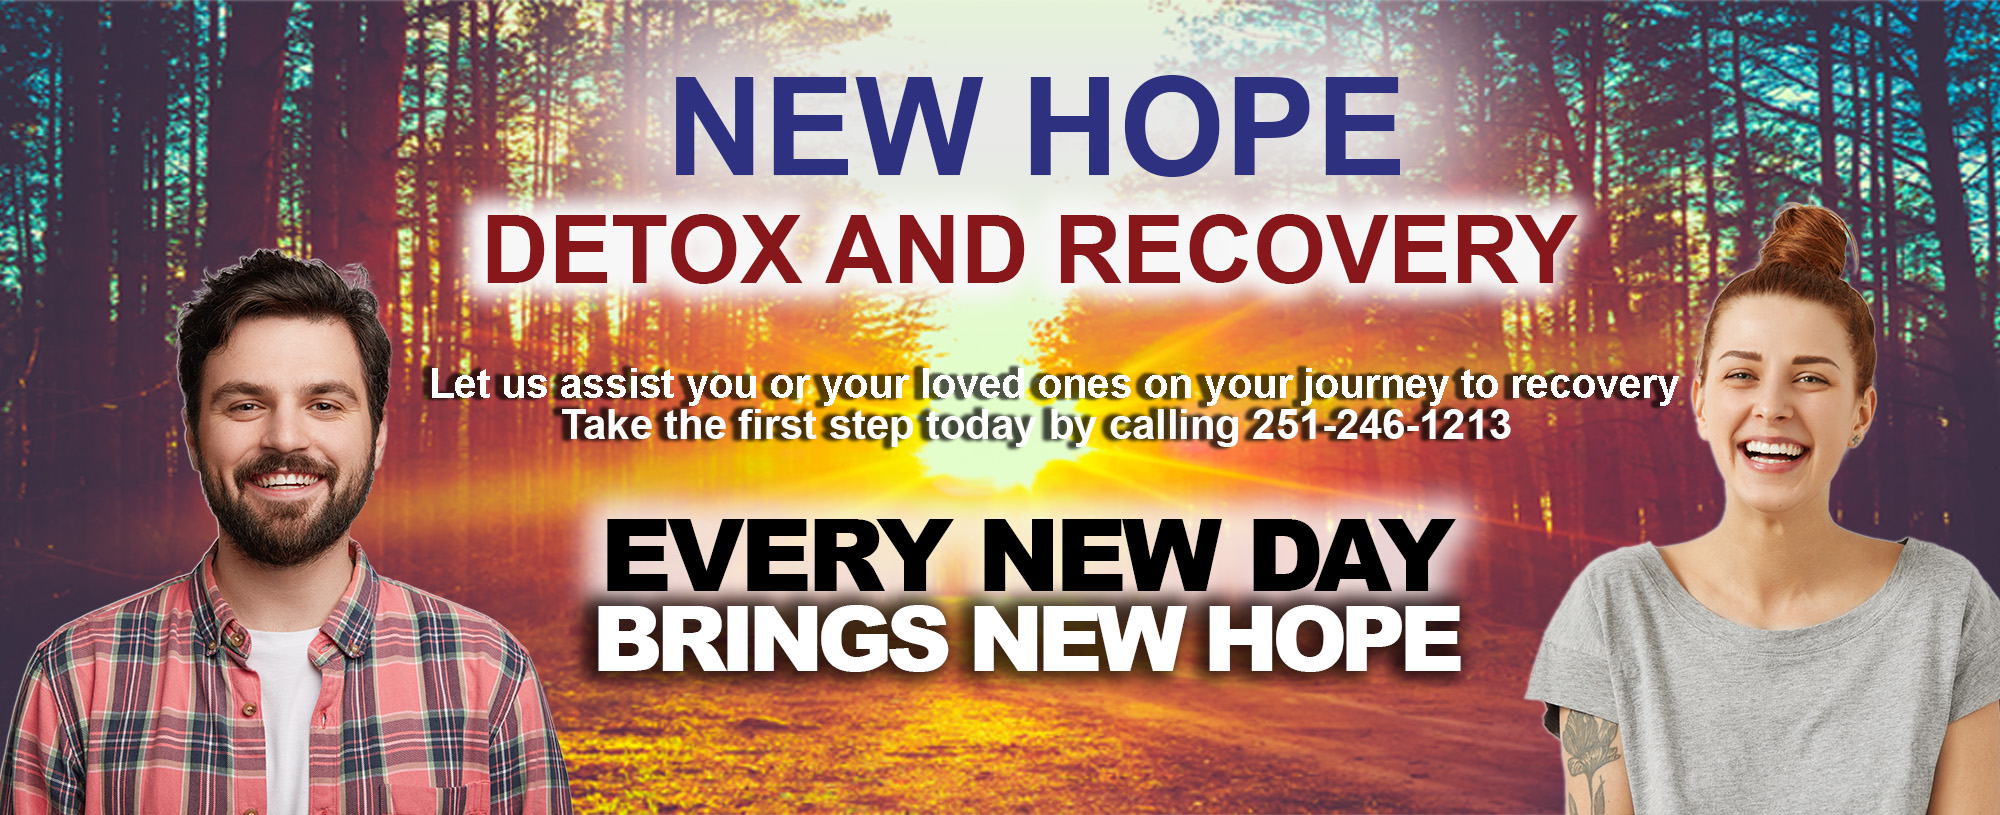 New Hope Detox and Recovery